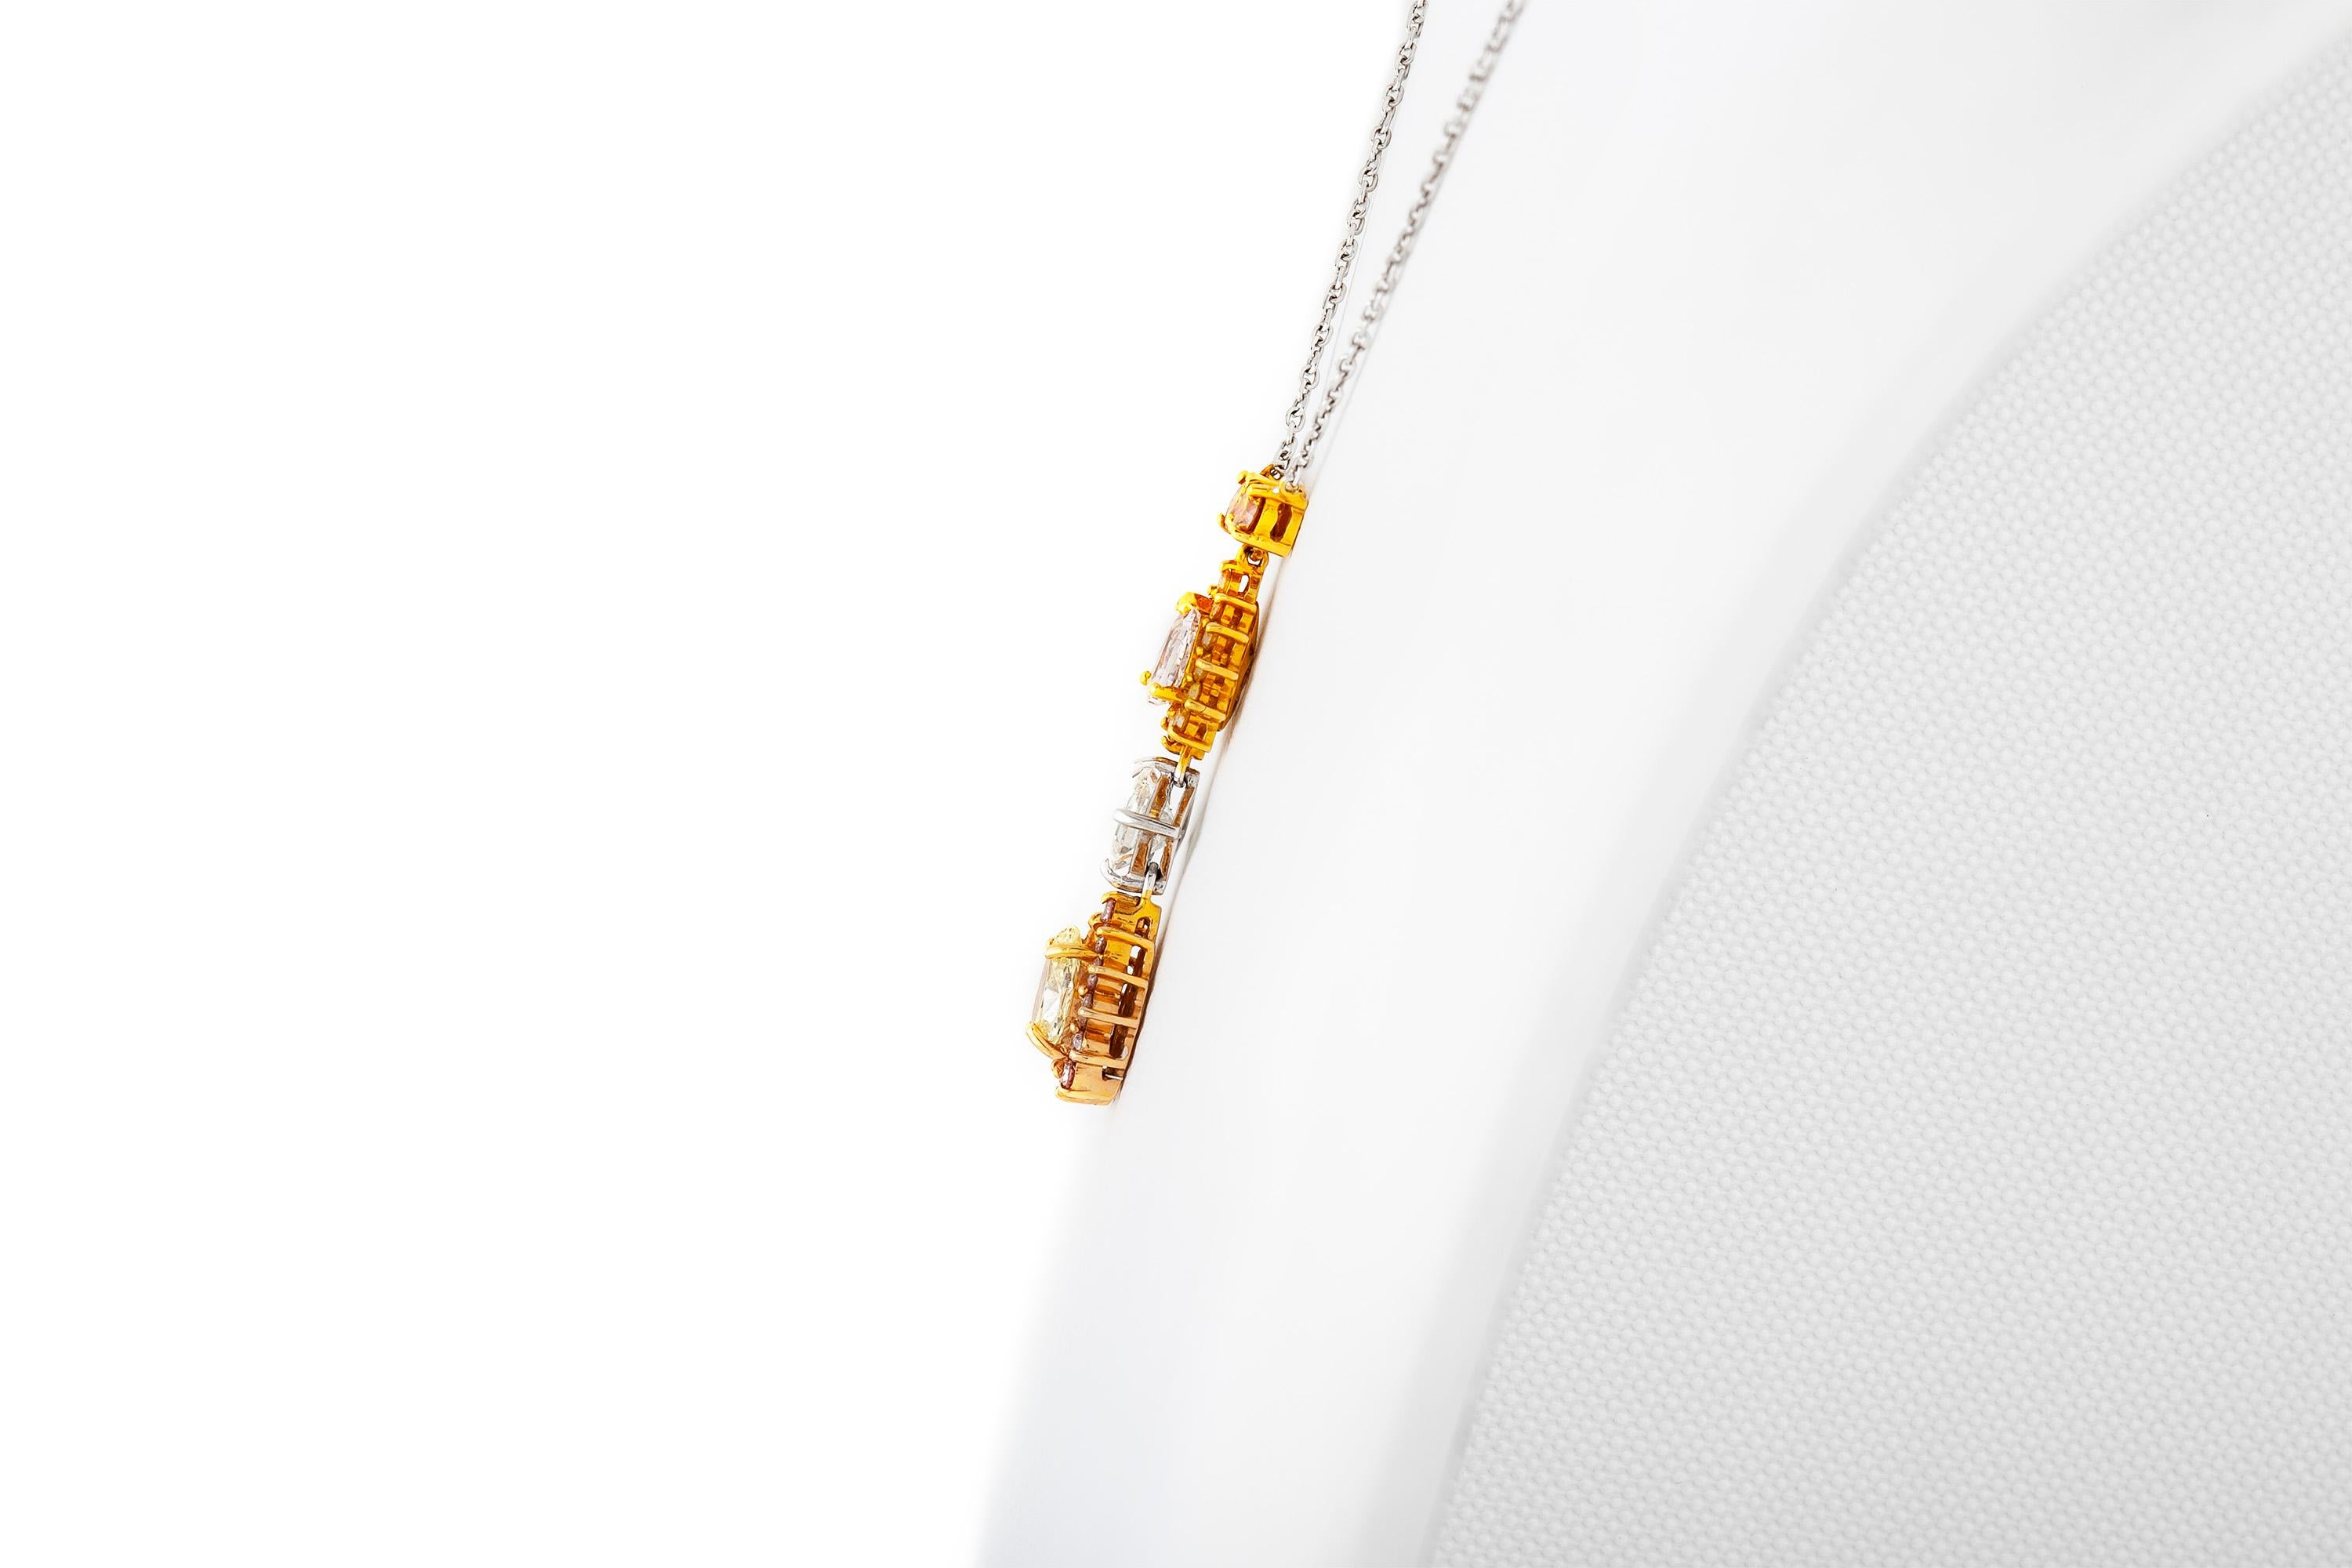 Pendant necklace, finely crafted in 18k gold and platinum with diamonds weighing approximately a total of 3.20 carats. Circa 2000.